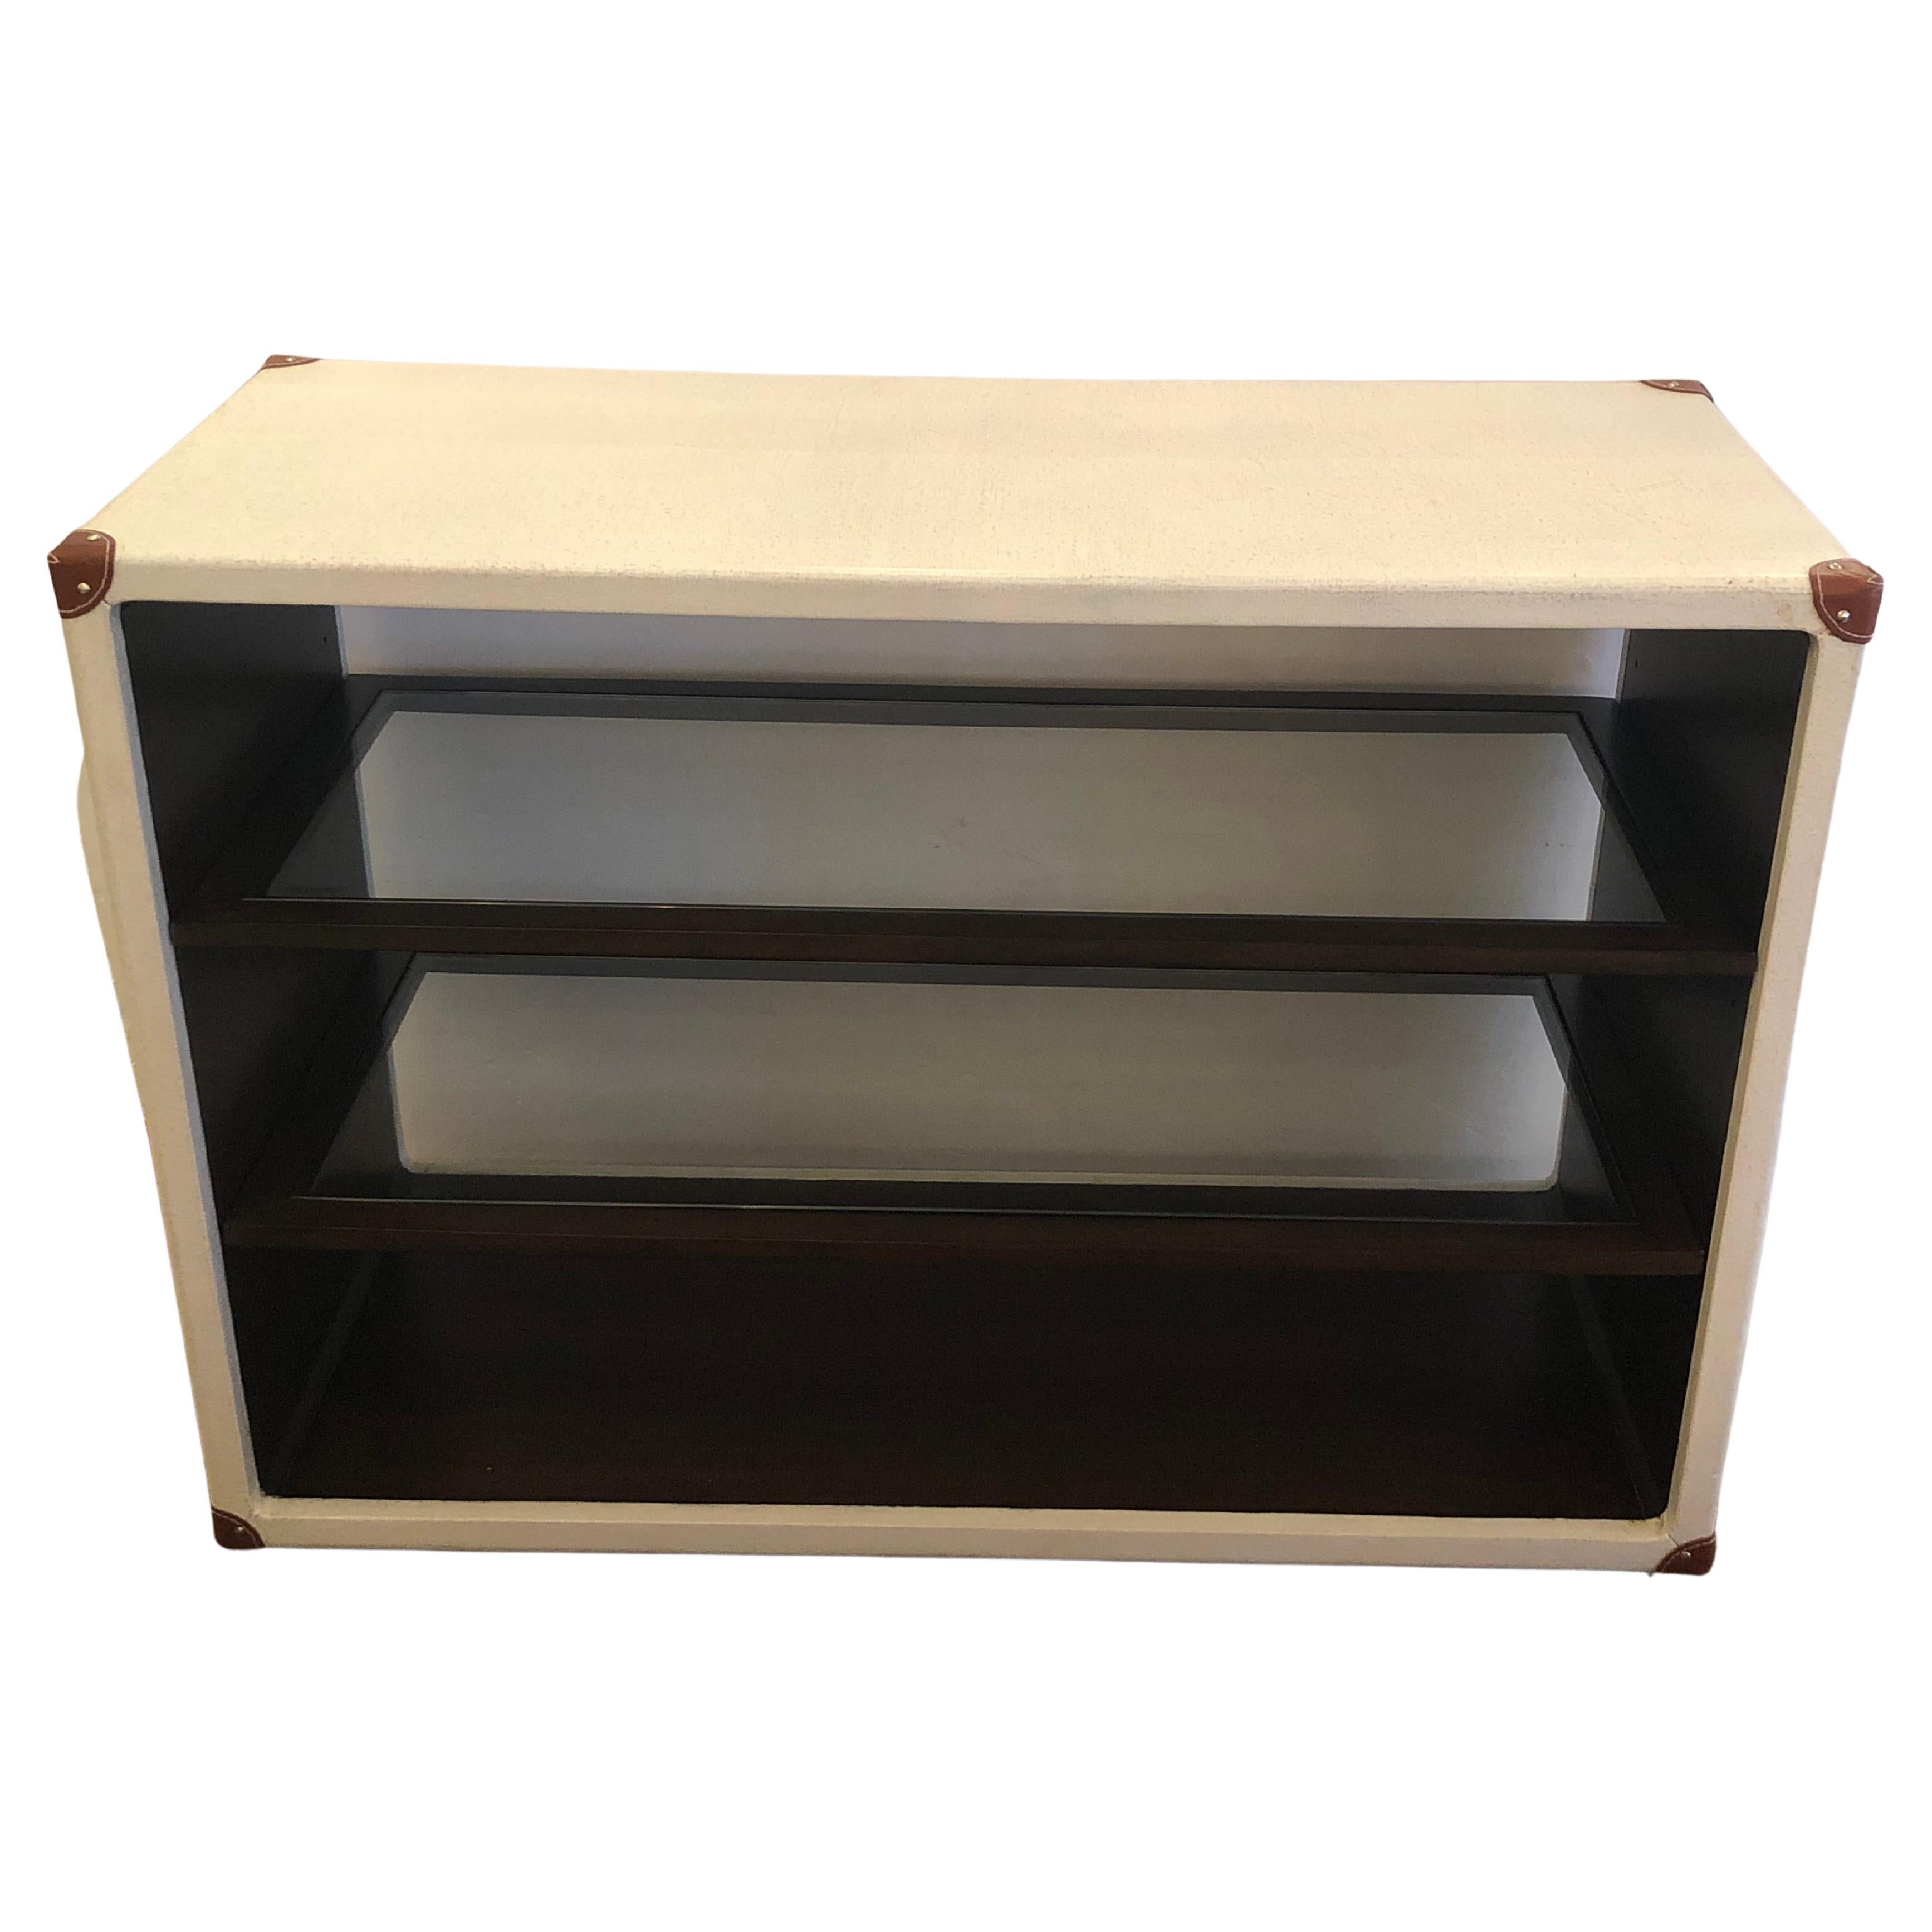 Ultra chic Century Furniture custom console bookshelf having speckled cream and brown faux leather wrapping and handsome brown leather corners.  The inside is mahogany with 3 adjustable glass shelves.  Heavy and substantially made.
8.25-8.5 